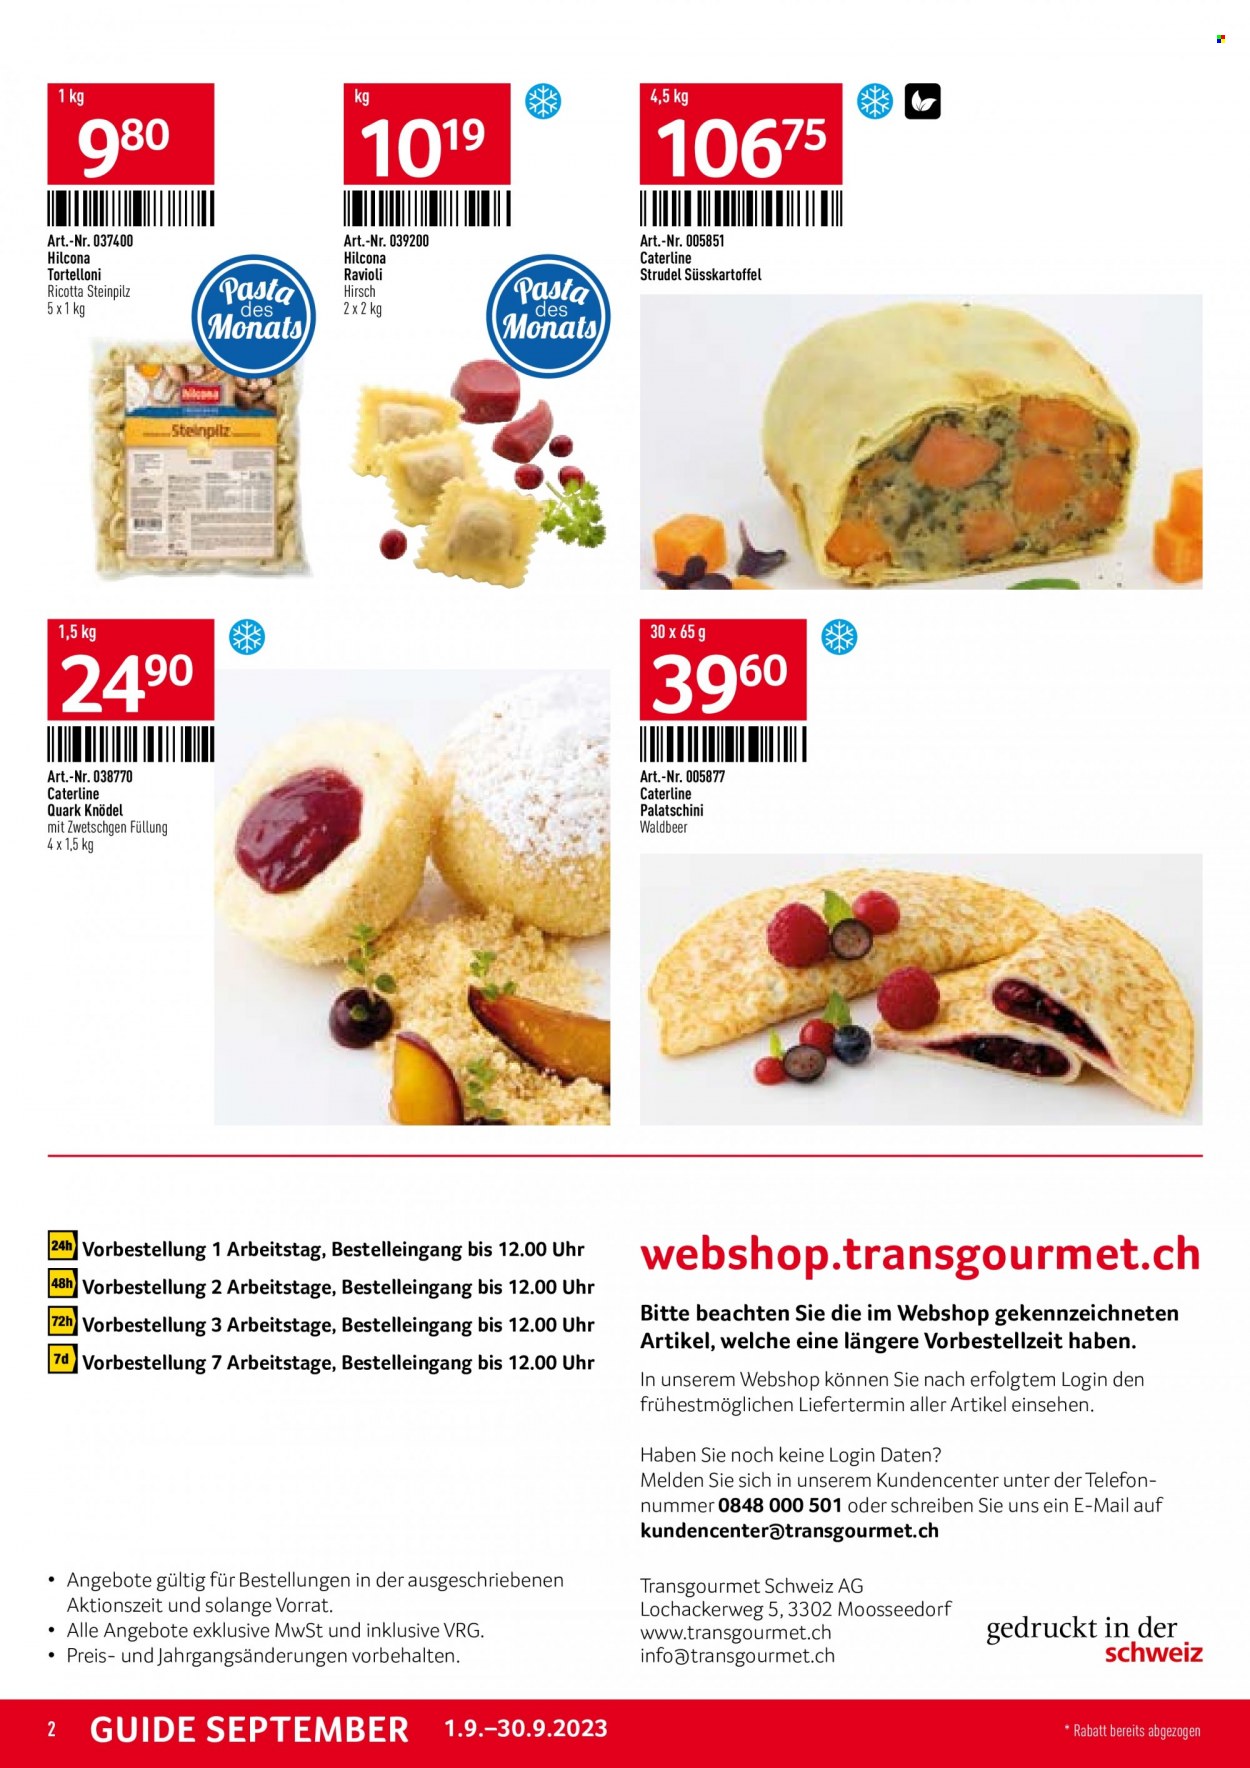 Catalogue TransGourmet - 1.9.2023 - 30.9.2023. Page 2.